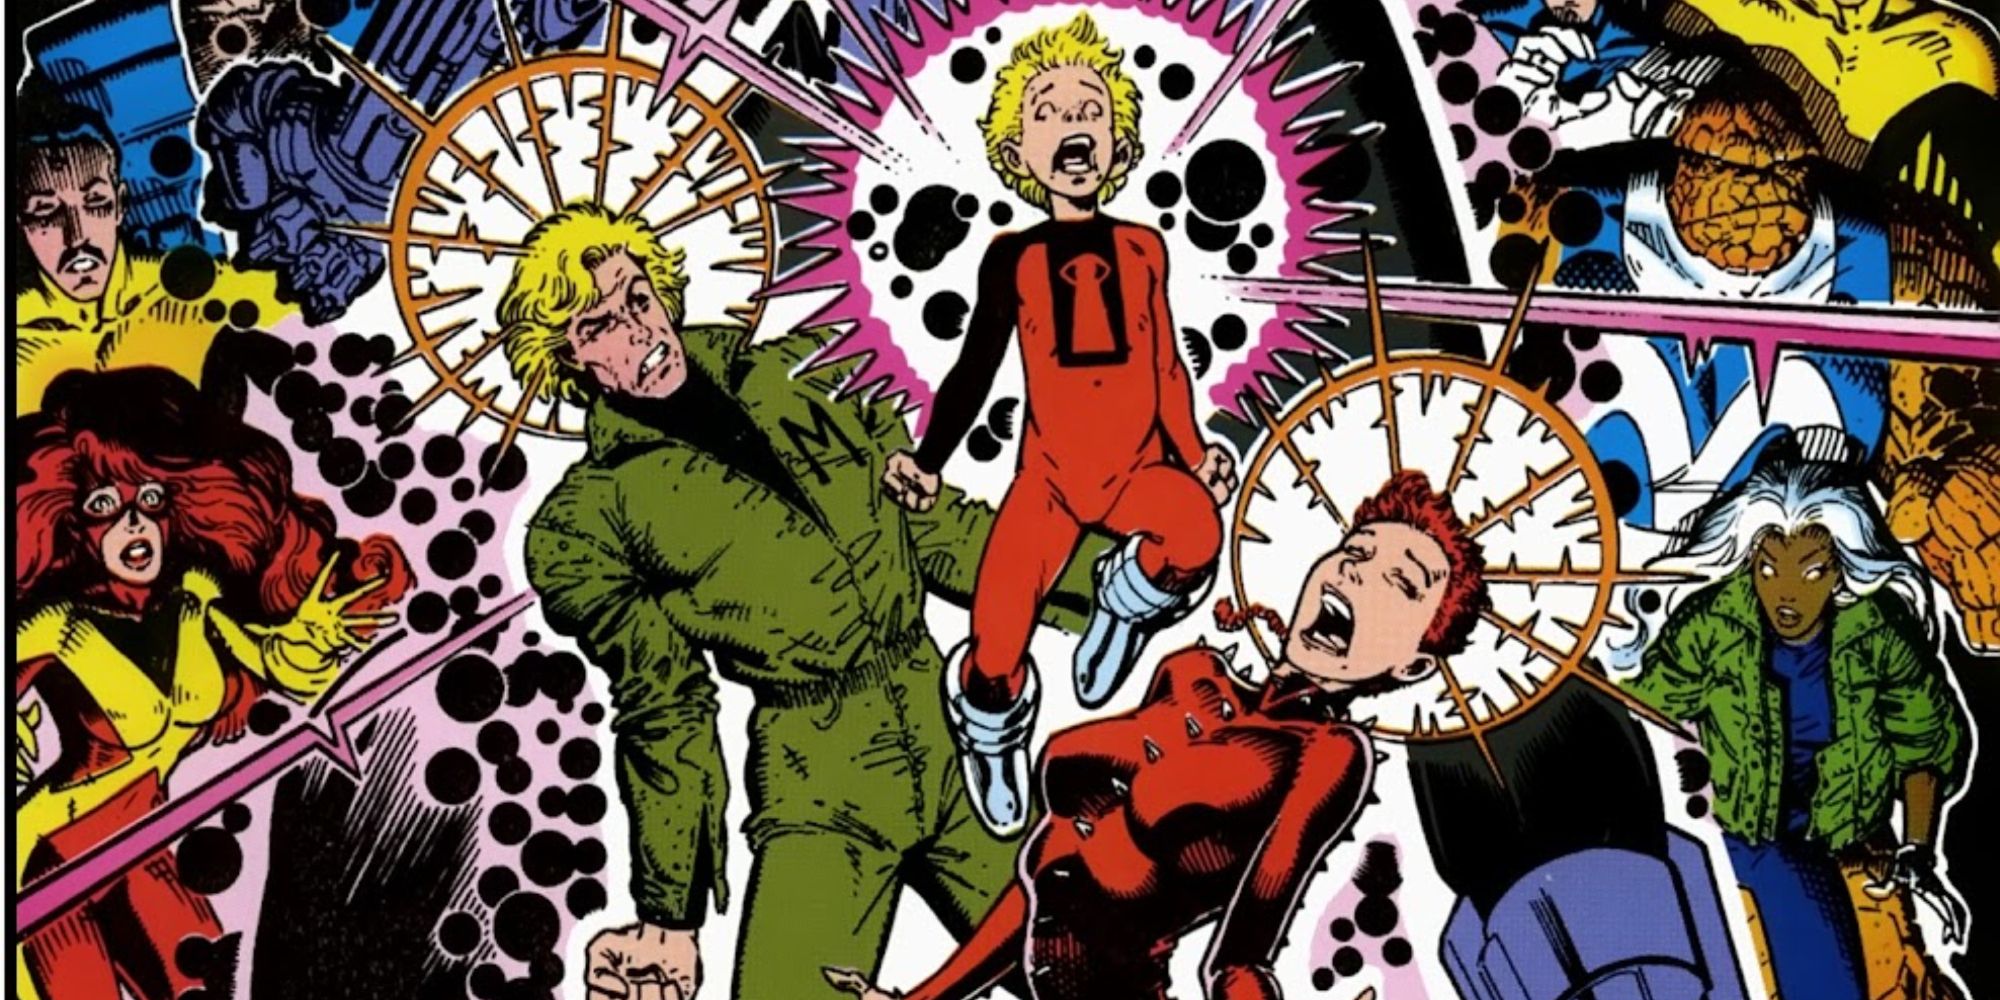 Rachel Summers and an adult Franklin Richards are attacked in Marvel Comics.